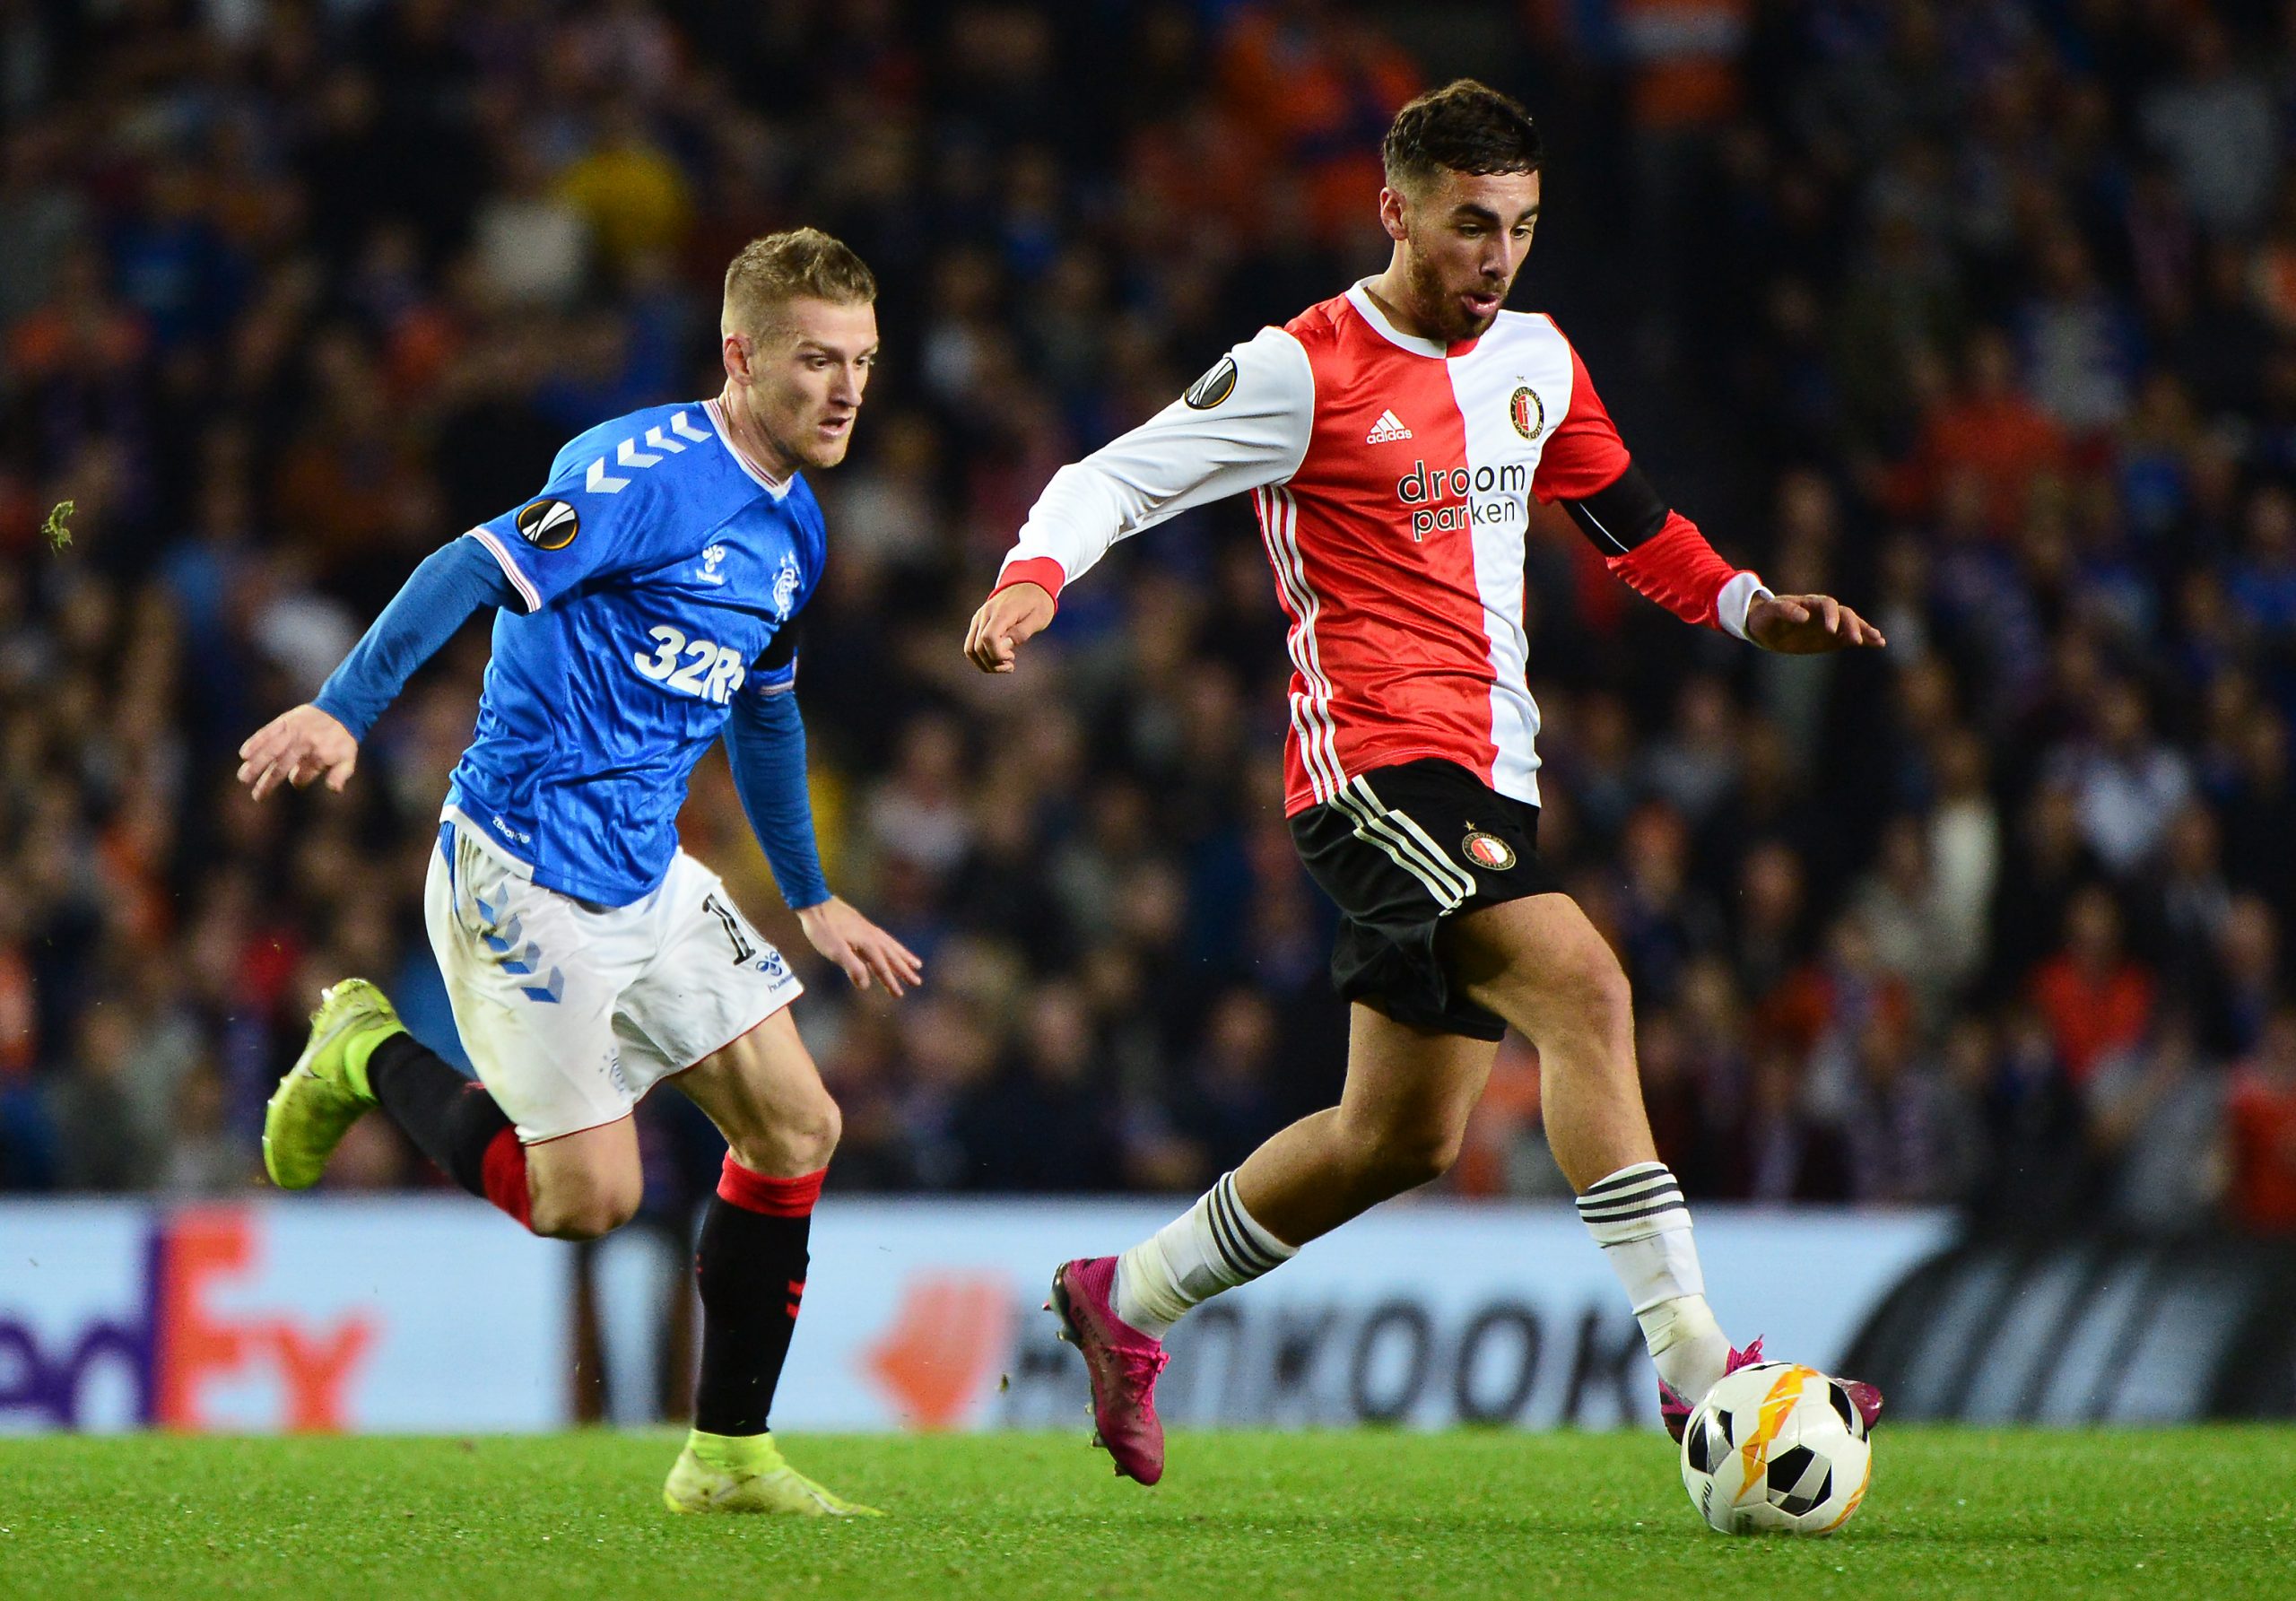 Orkun Kokcu of Feyenoord runs past Steven Davis of Rangers FC during the UEFA Europa League group G match between Rangers FC and Feyenoord at Ibrox Stadium on September 19, 2019 in Glasgow, United Kingdom. (Photo by Mark Runnacles/Getty Images)